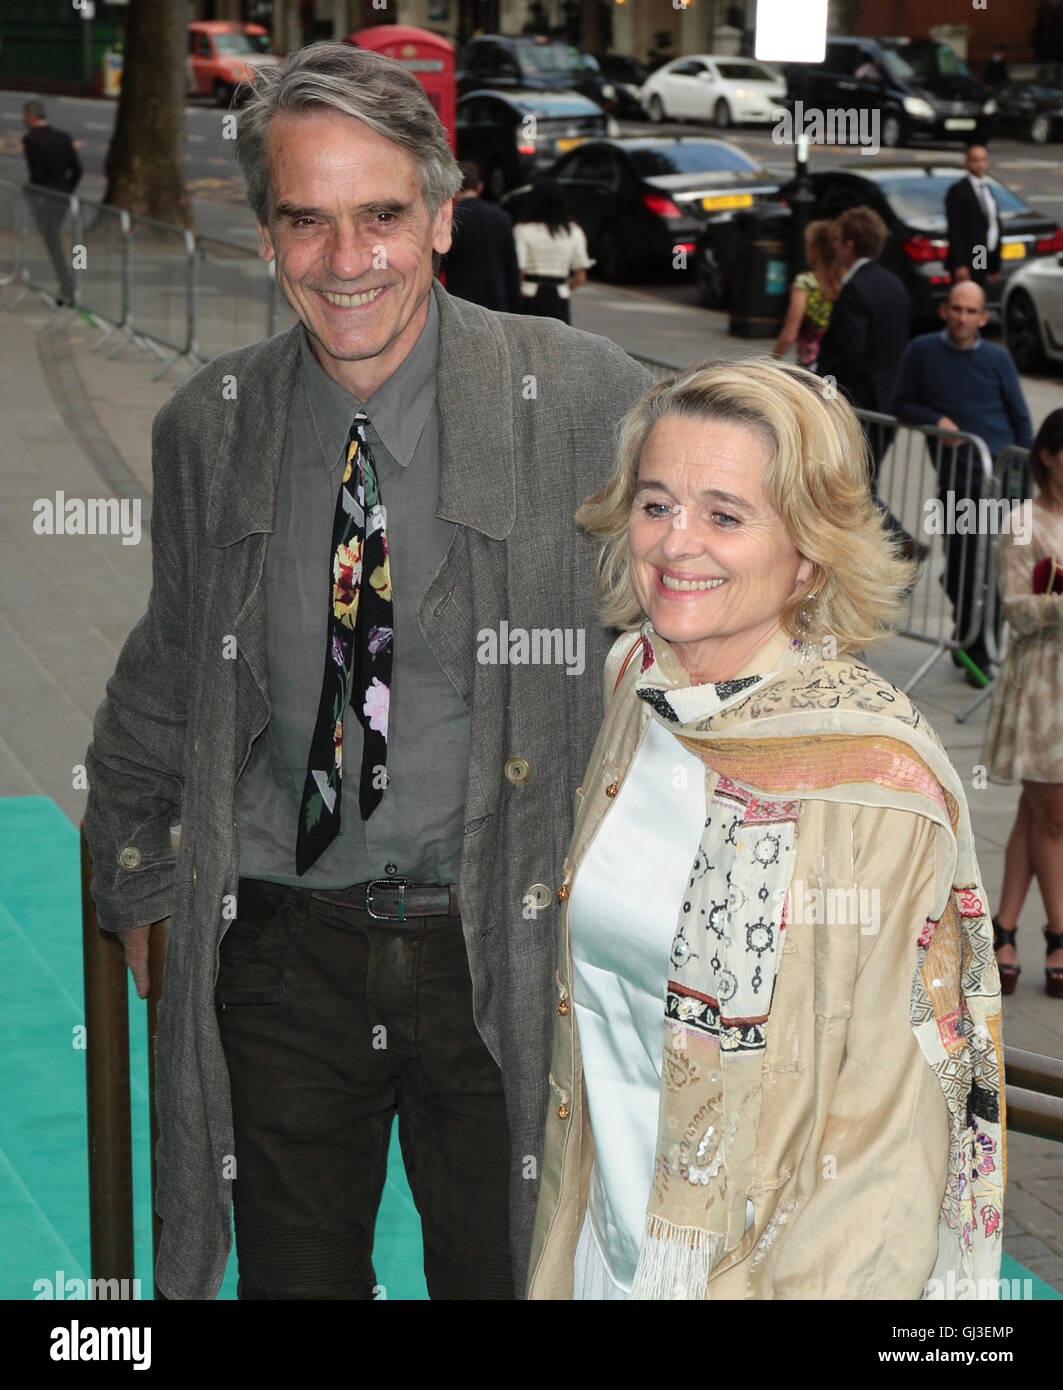 Jeremy Irons and Sinead Cusack attends the Victoria and Albert Museum Summer Party in London, UK - 22 Jun 2016 Stock Photo